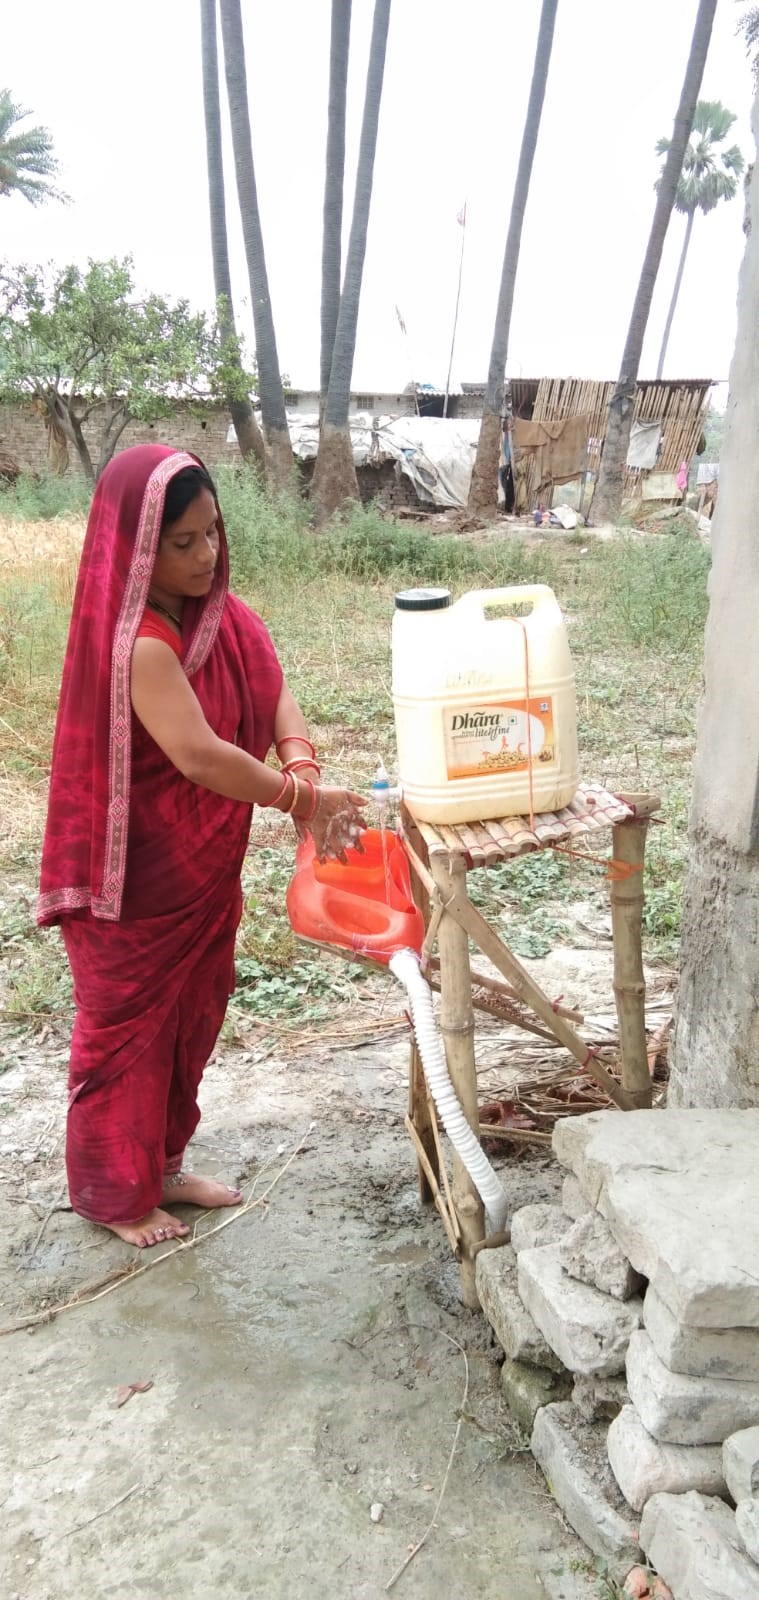 A woman washing hands on the bamboo stick low cost handwashing station (Image Source: Sehgal Foundation)